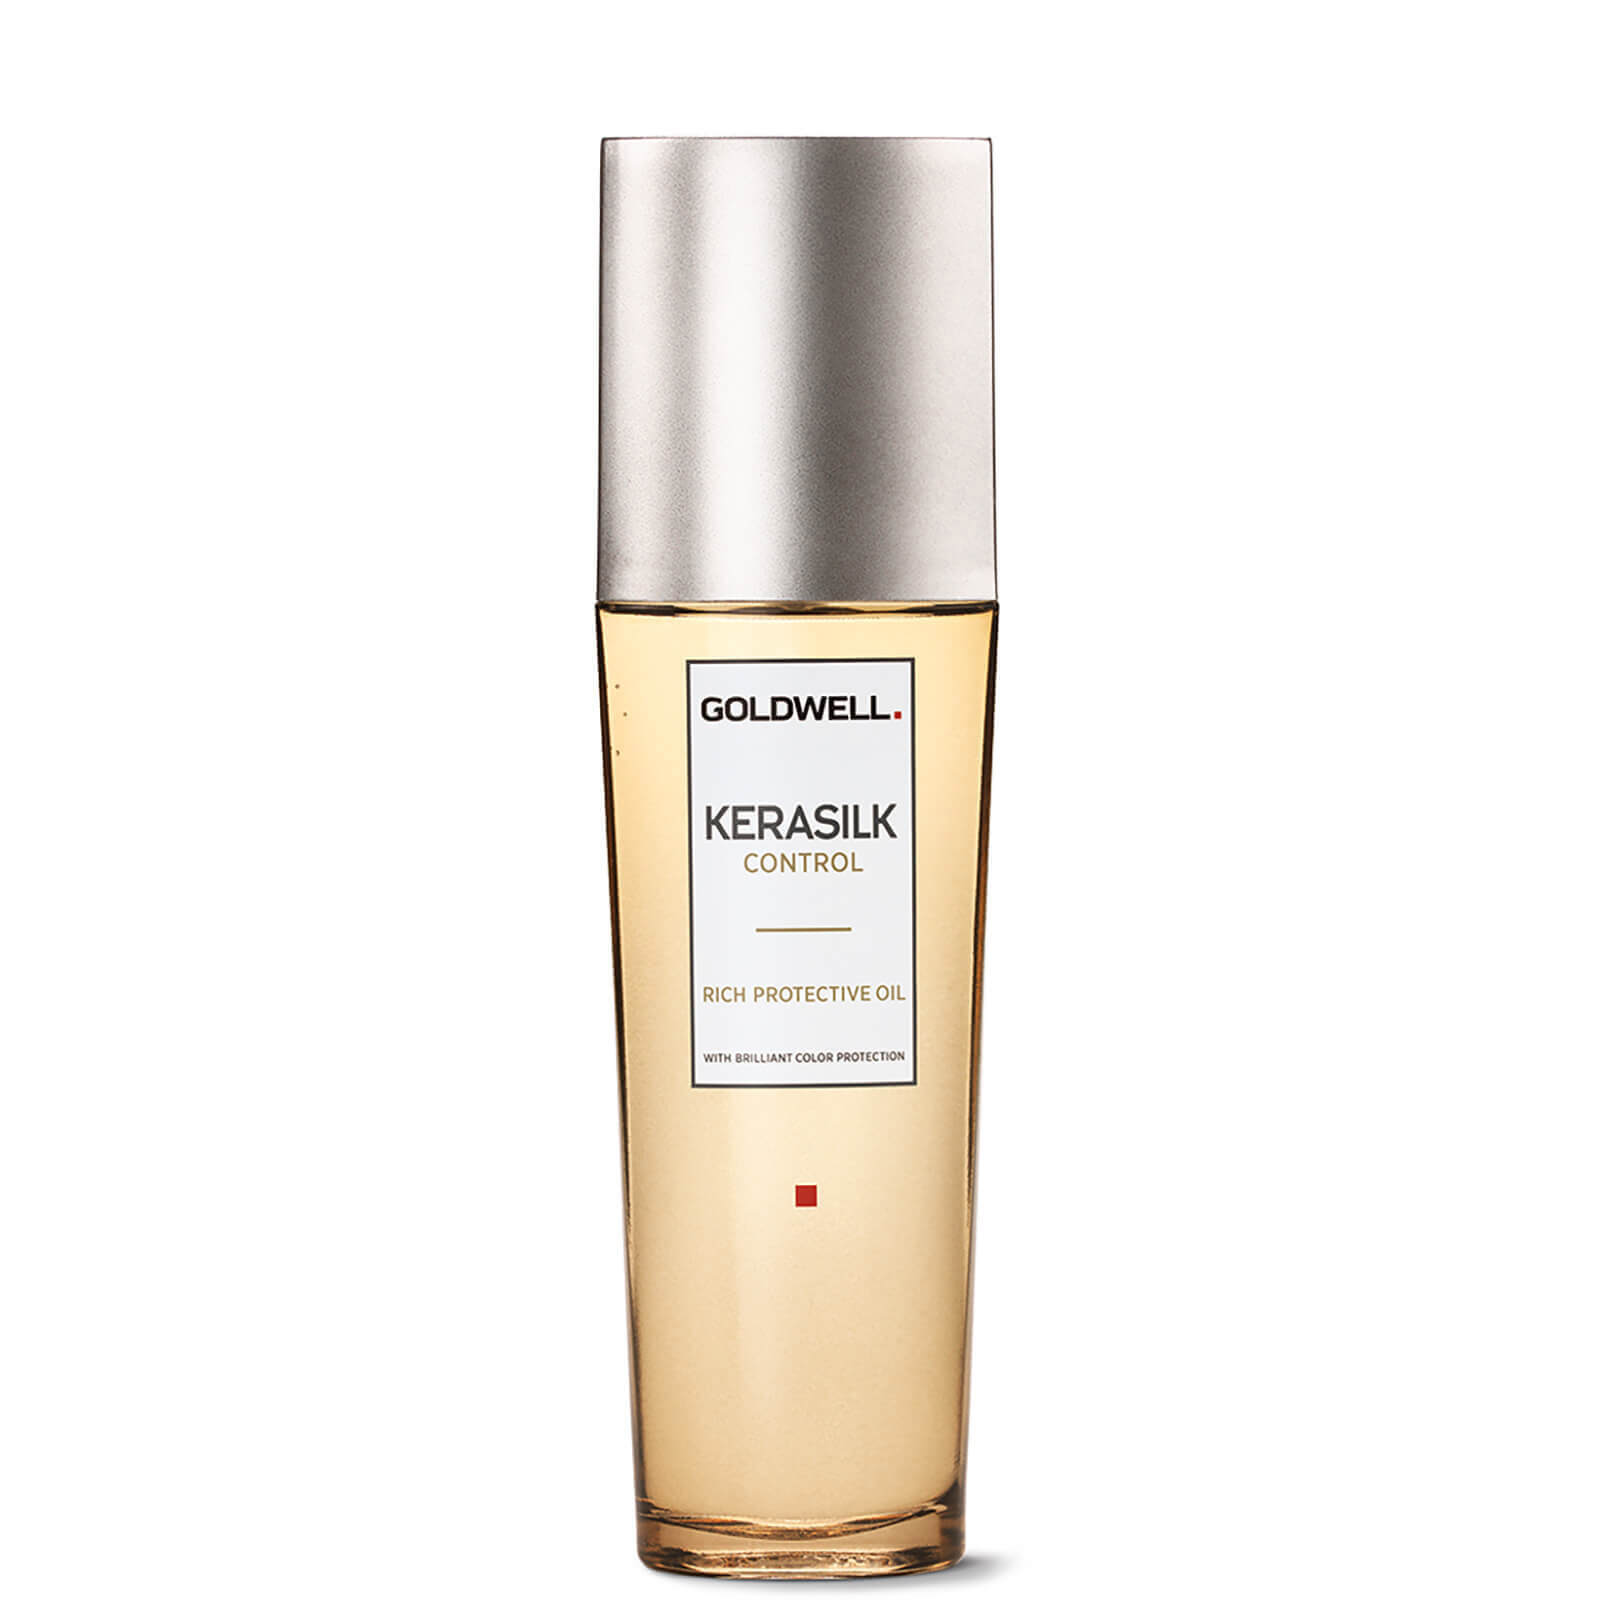 Image of Goldwell Kerasilk Control Rich Protective Oil 75ml